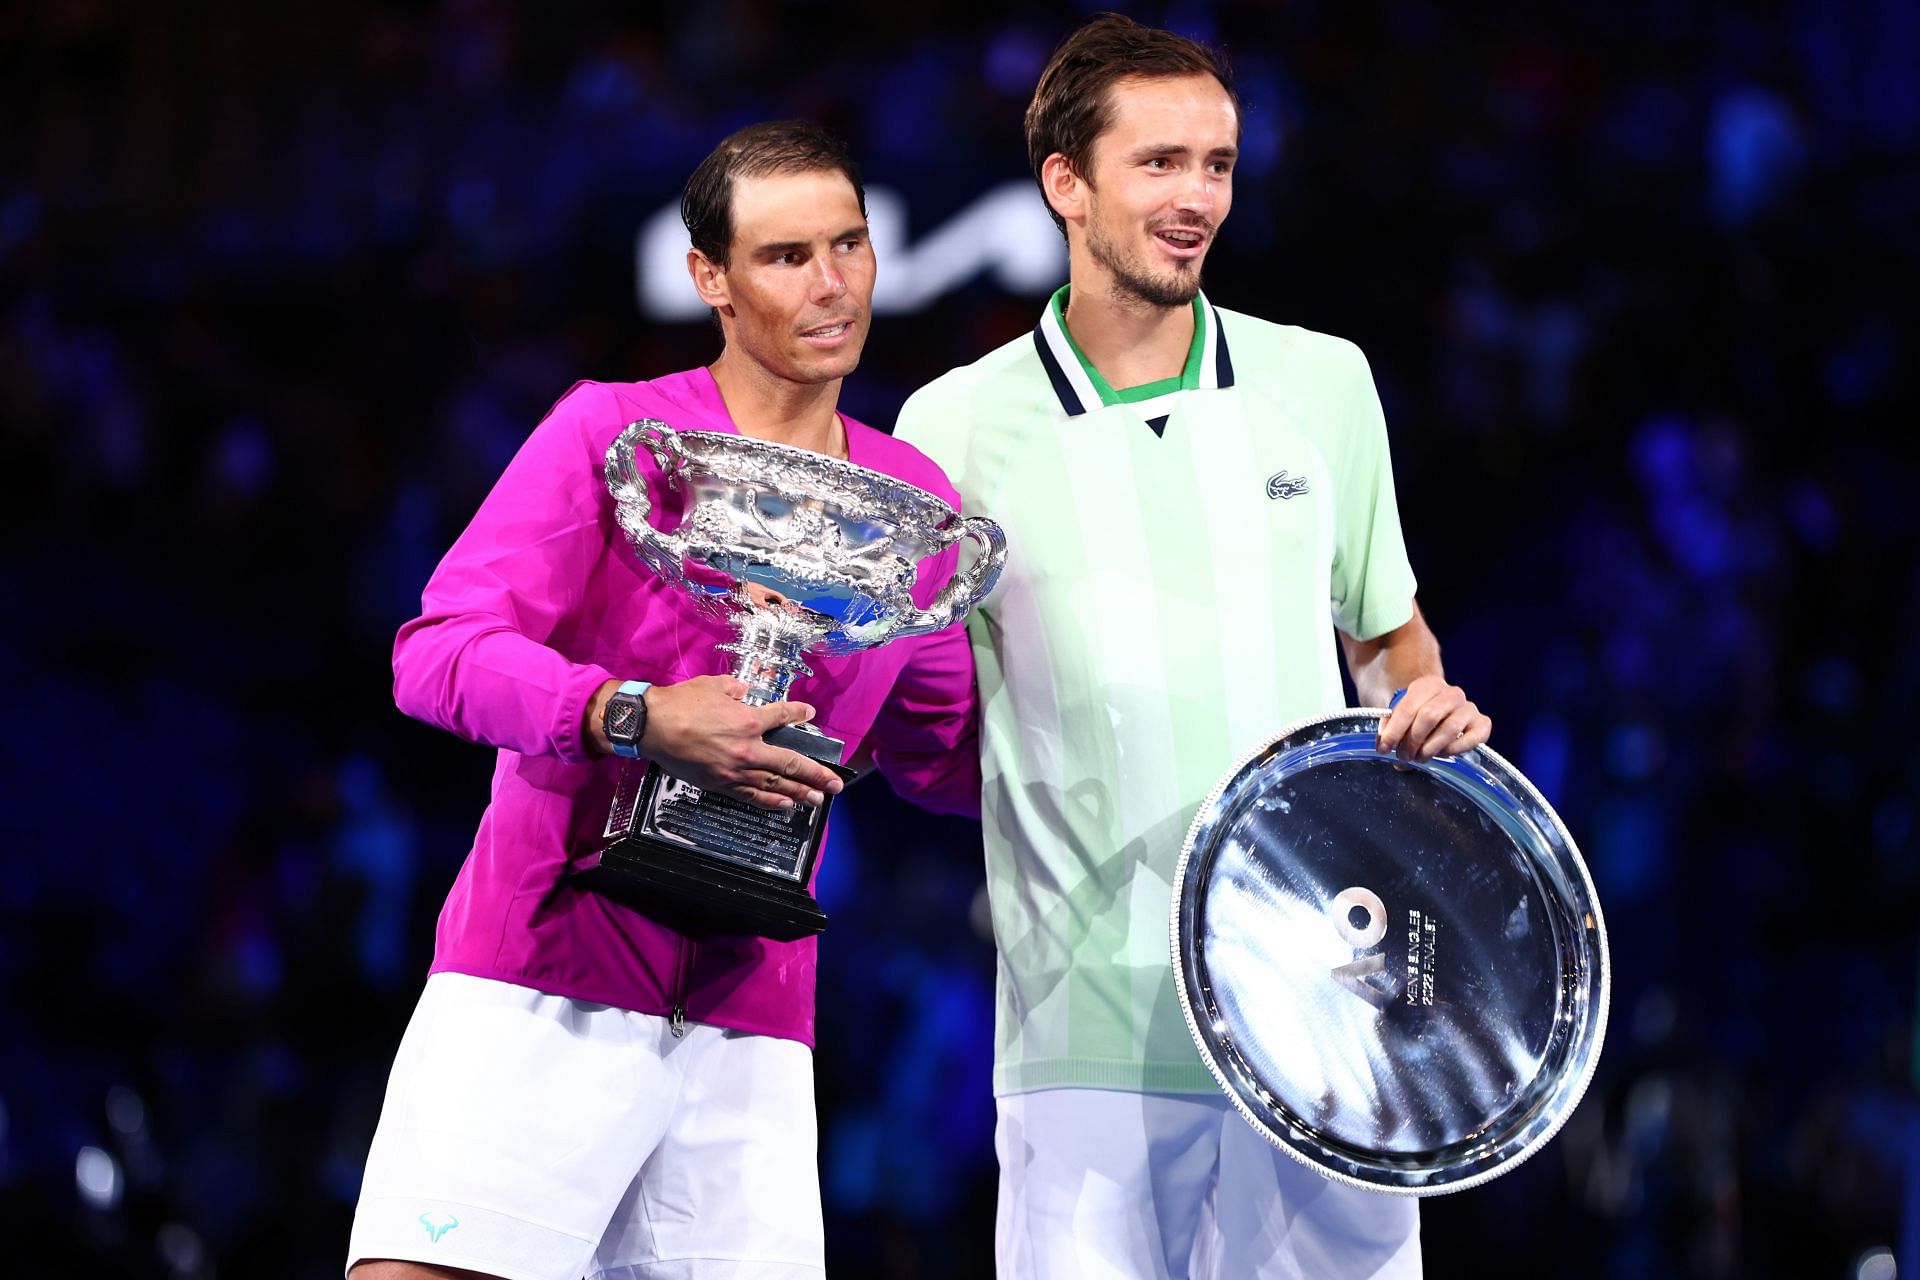 Rafael Nadal (L) and Daniil Medvedev pose during the trophy presentation for the Men&rsquo;s Singles Final match at the 2022 Australian Open